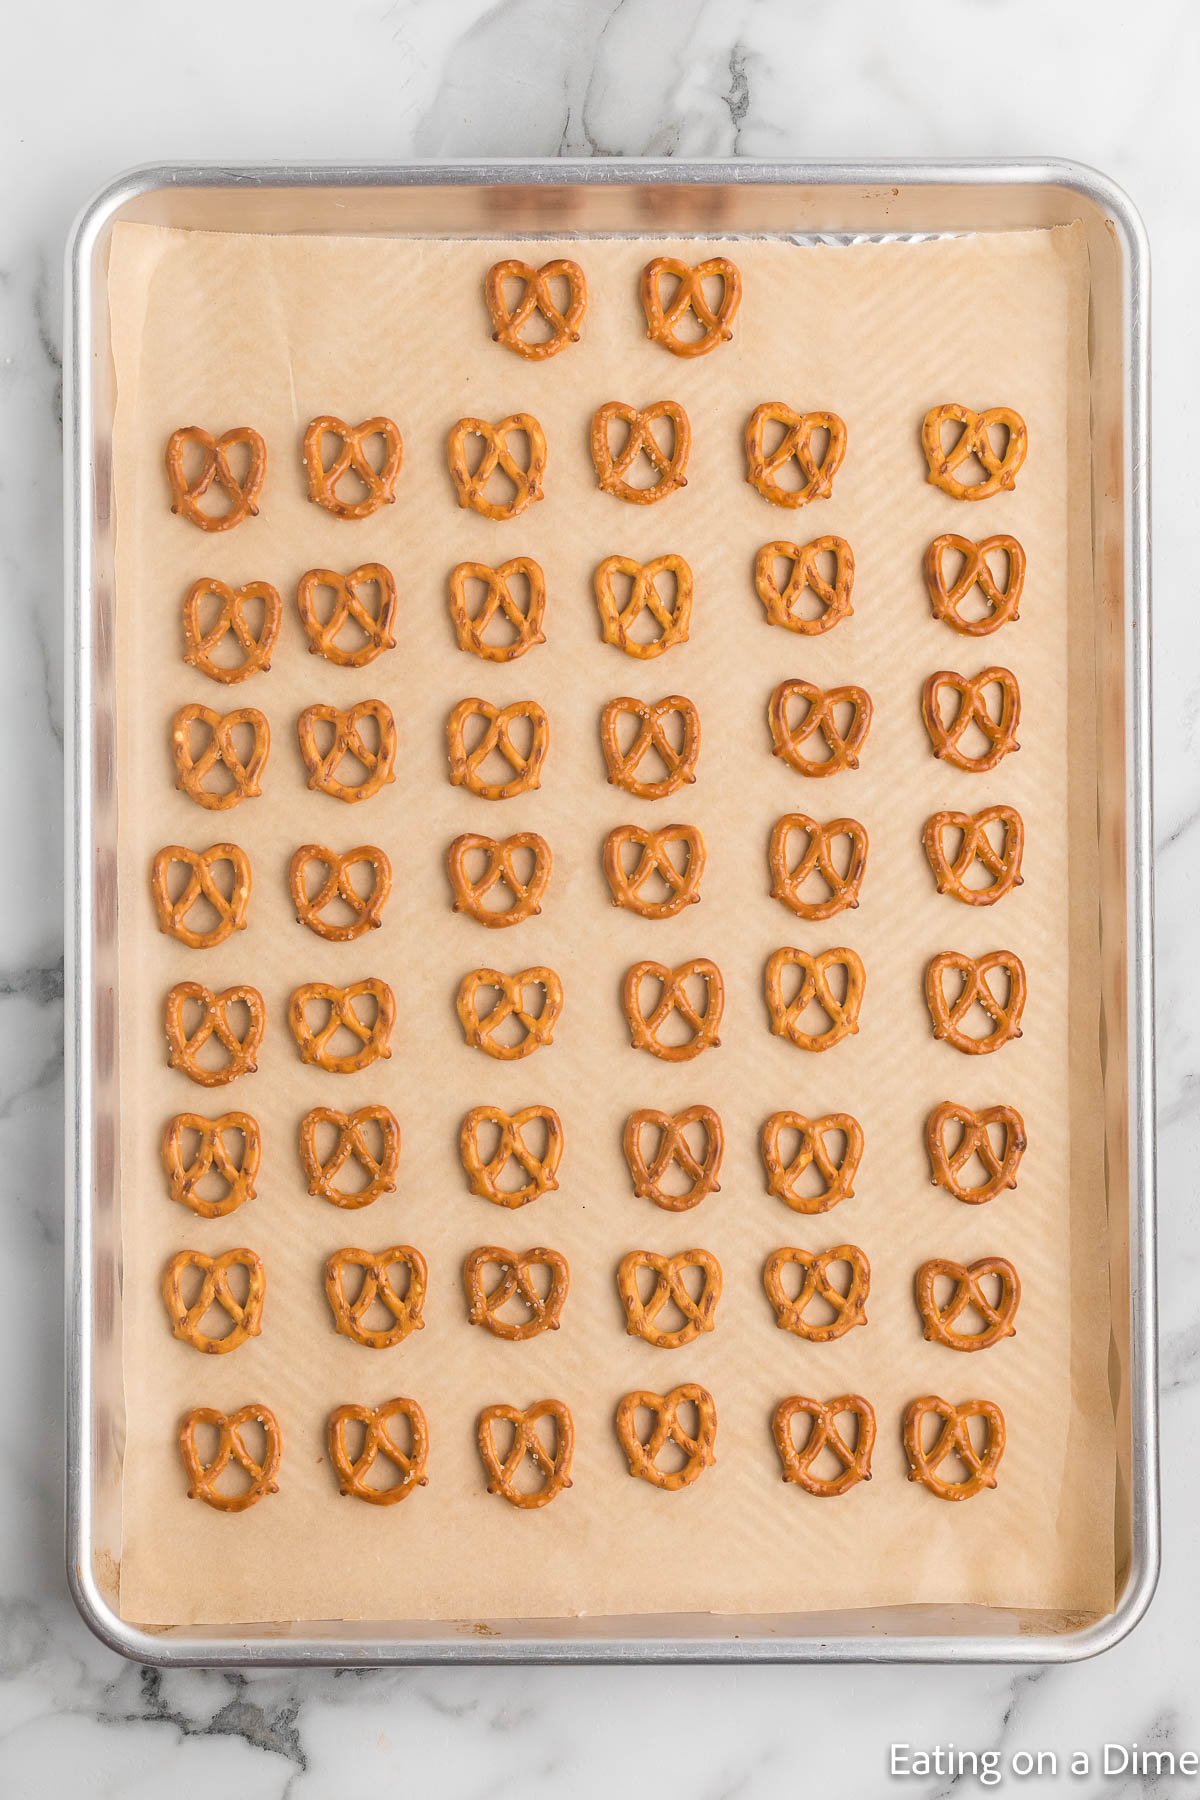 Placing a layer of pretzel on a baking sheet lined with parchment paper